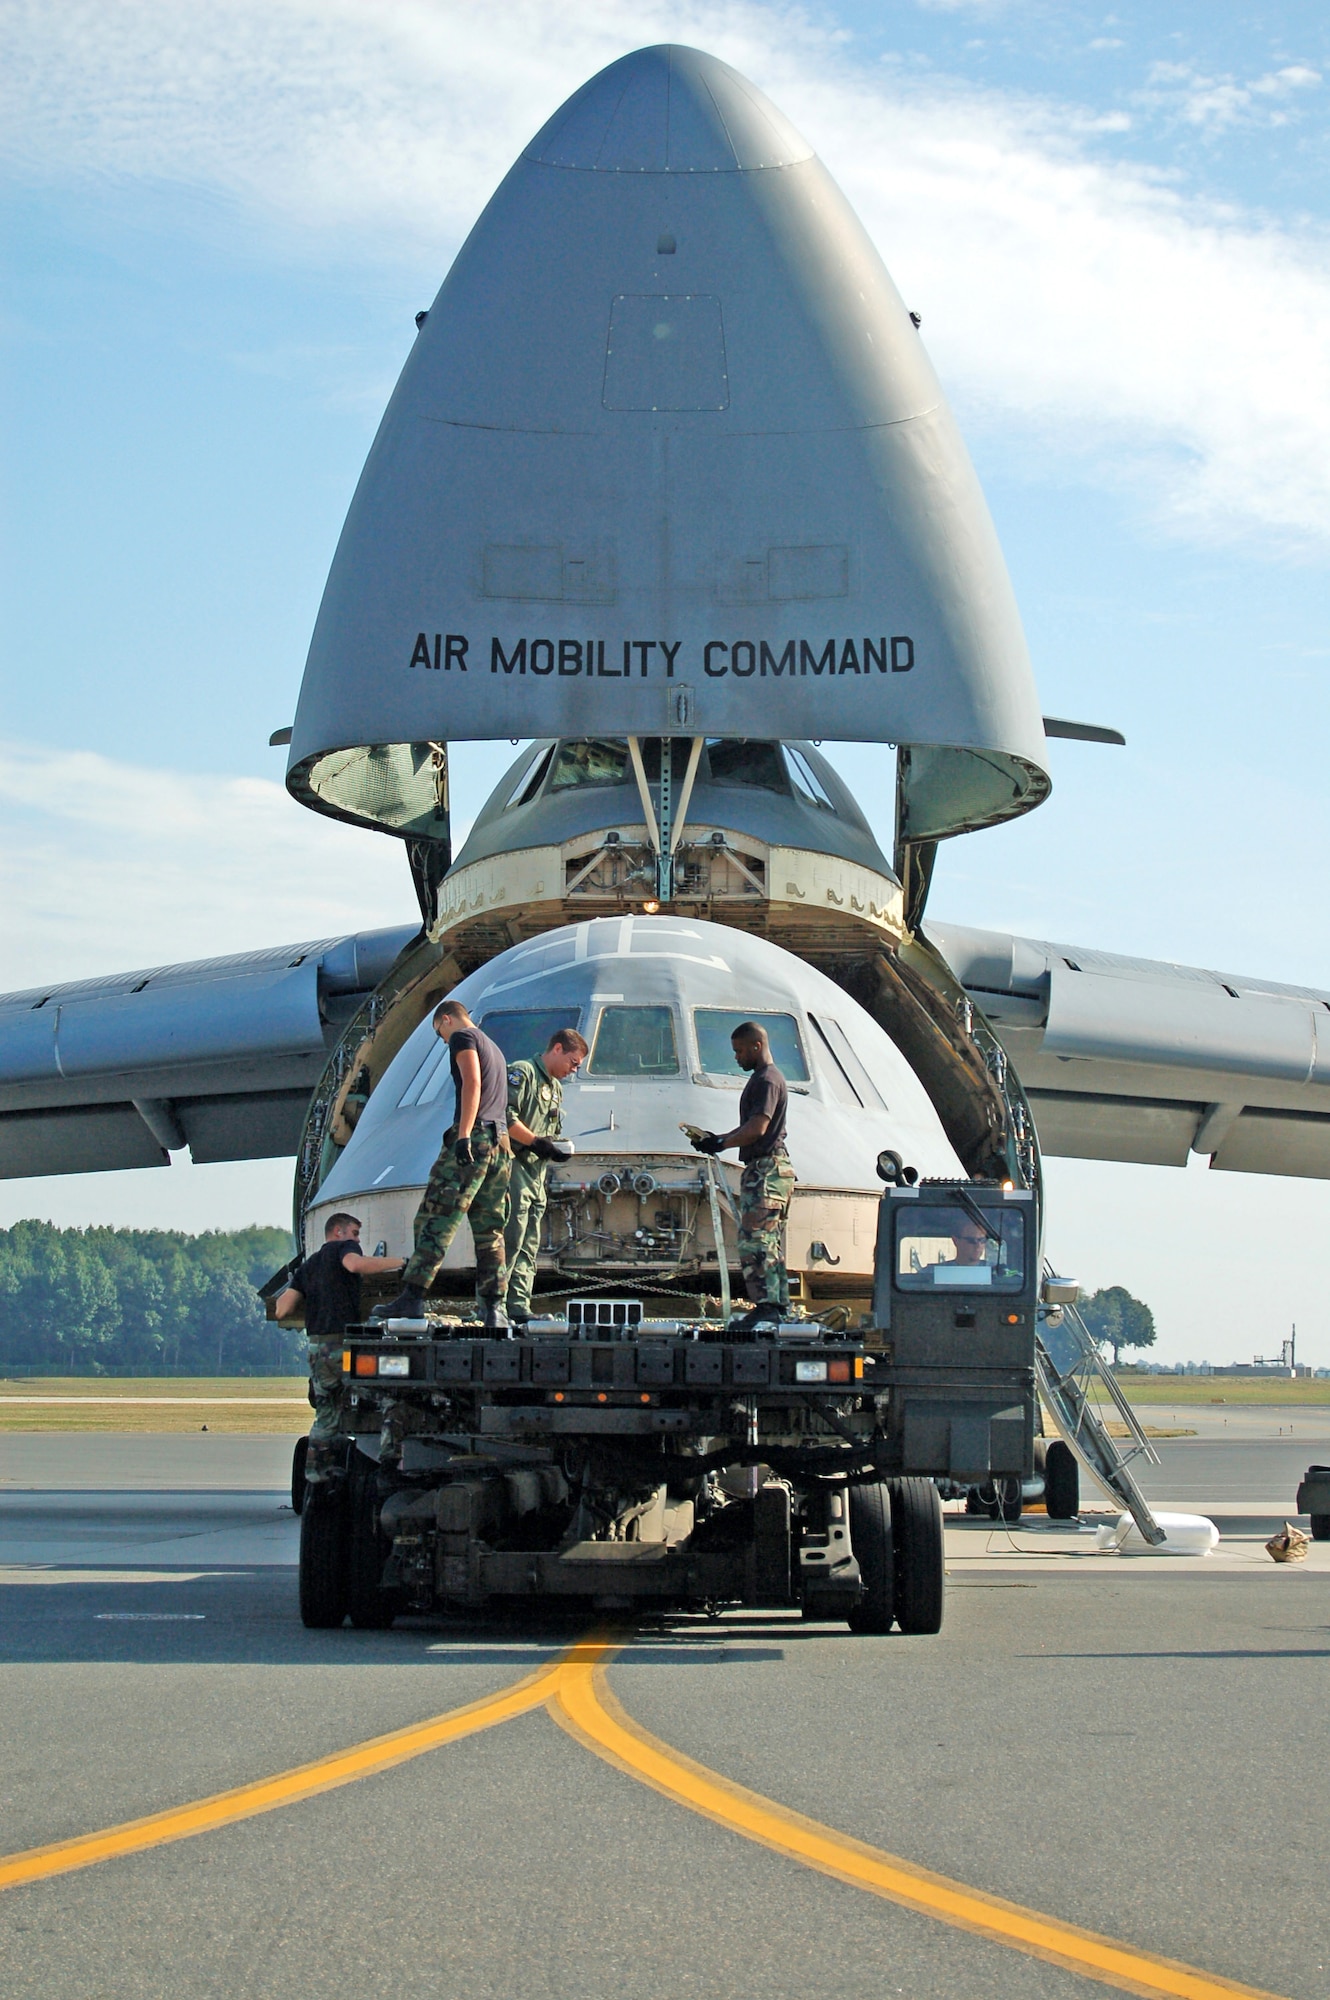 (Left to right) Staff Sgt. John Rollins, Airman 1st Class Shain Brower, Staff Sgt. Stuard Smith II and Senior Airman Joseph Moseley load a C-5 Galaxy flight deck onto another C-5 for transport to Robins Air Force Base, Ga. The flight deck from the C-5 that crashed April 3 will be used to as a training simulator. Sergeant Rollins and Airmen Brower and Moseley are assigned to the 436th Aerial Port Squadron; Sergeant Smith is with the 9th Airlift Squadron. (U.S. Air Force photo/Airman 1st Class James Bolinger)
